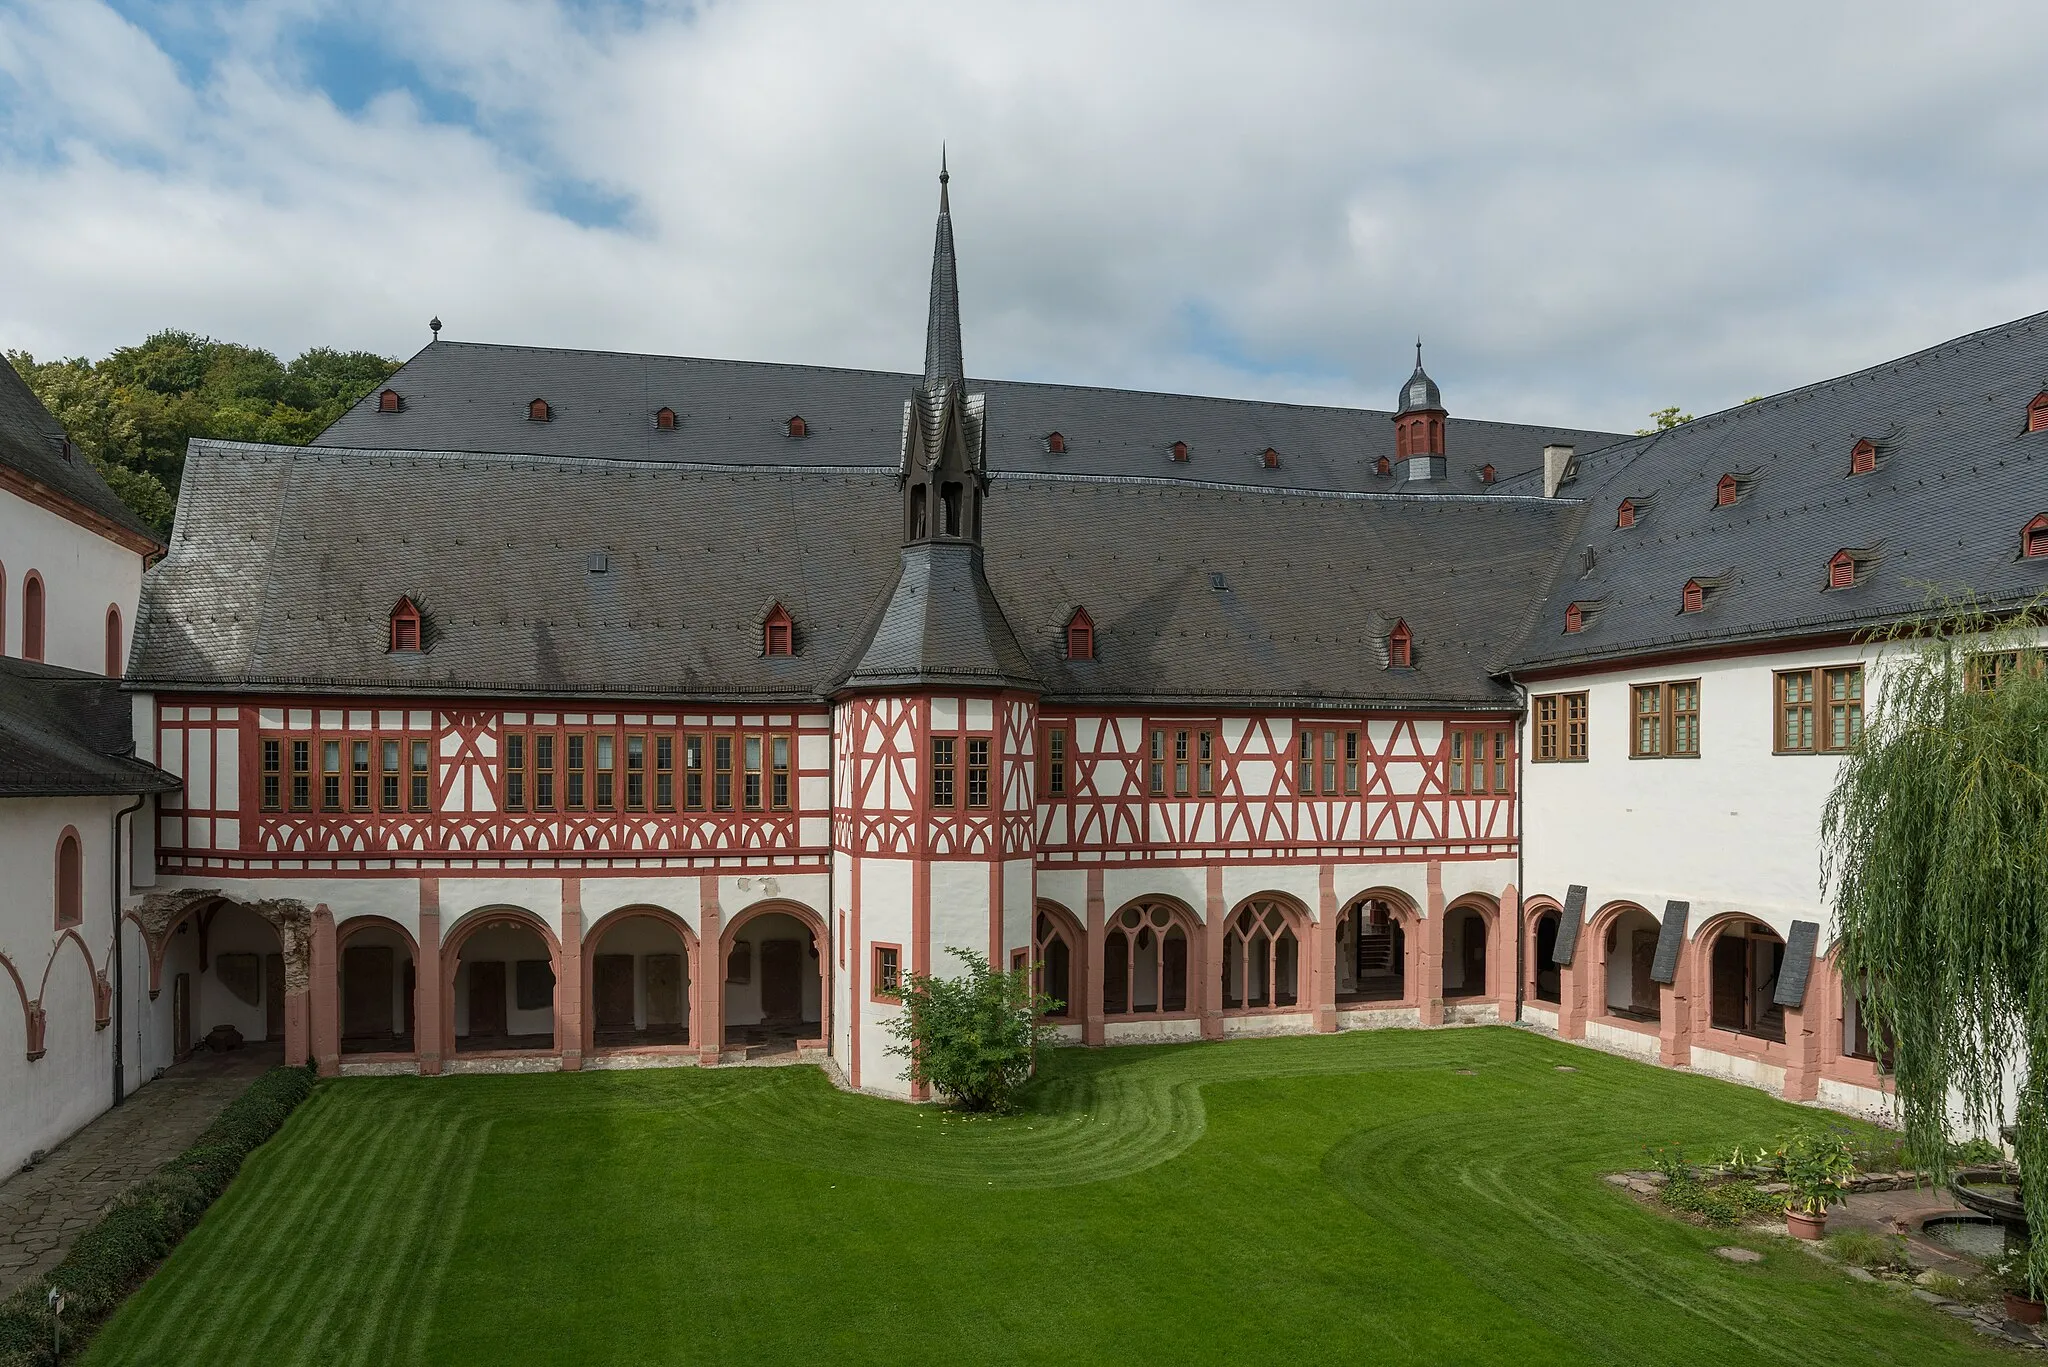 Photo showing: The cloister of Kloster Eberbach as seen from the first floor